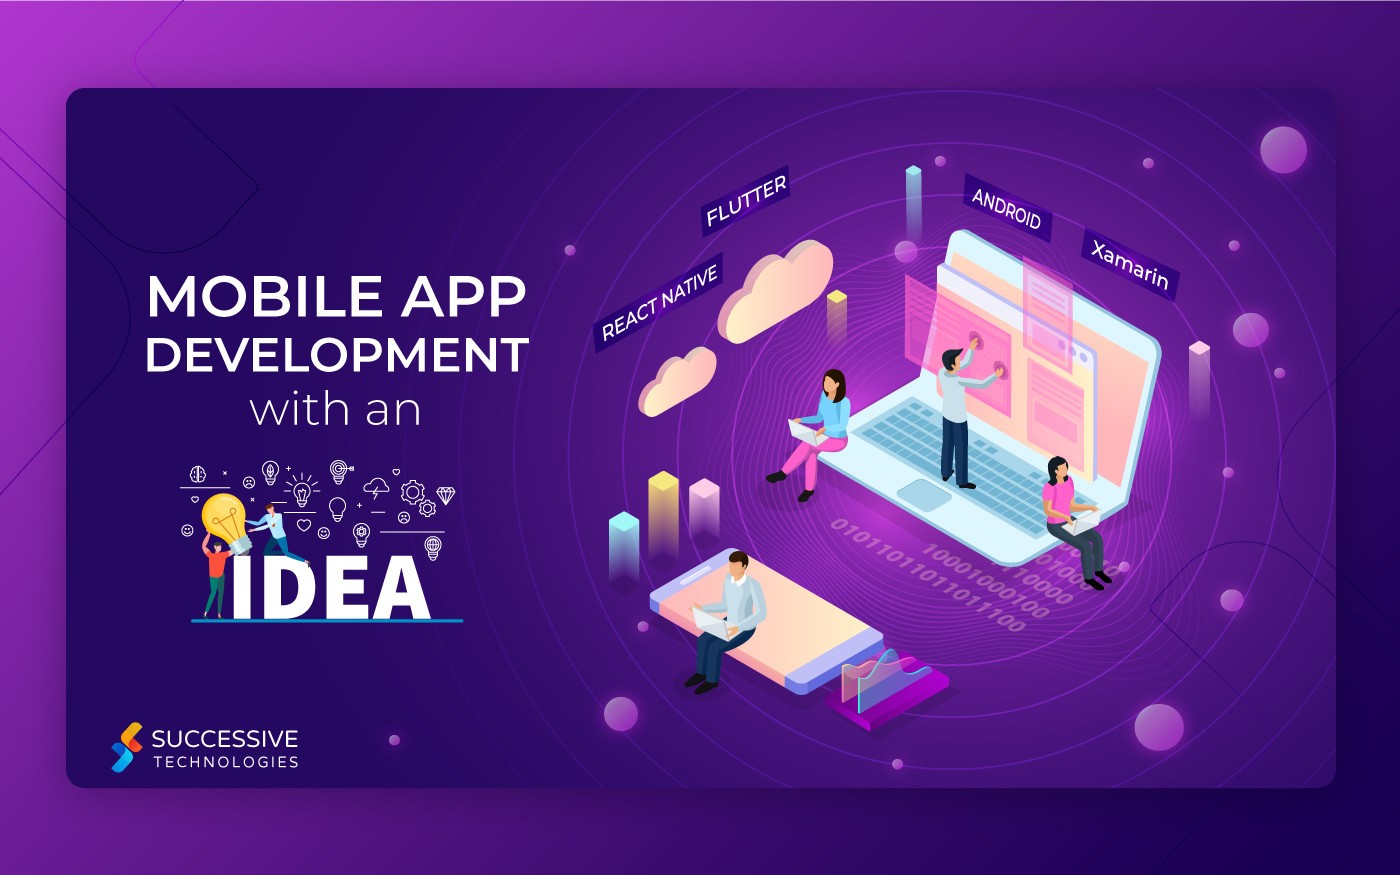 The process of developing a mobile app from an idea